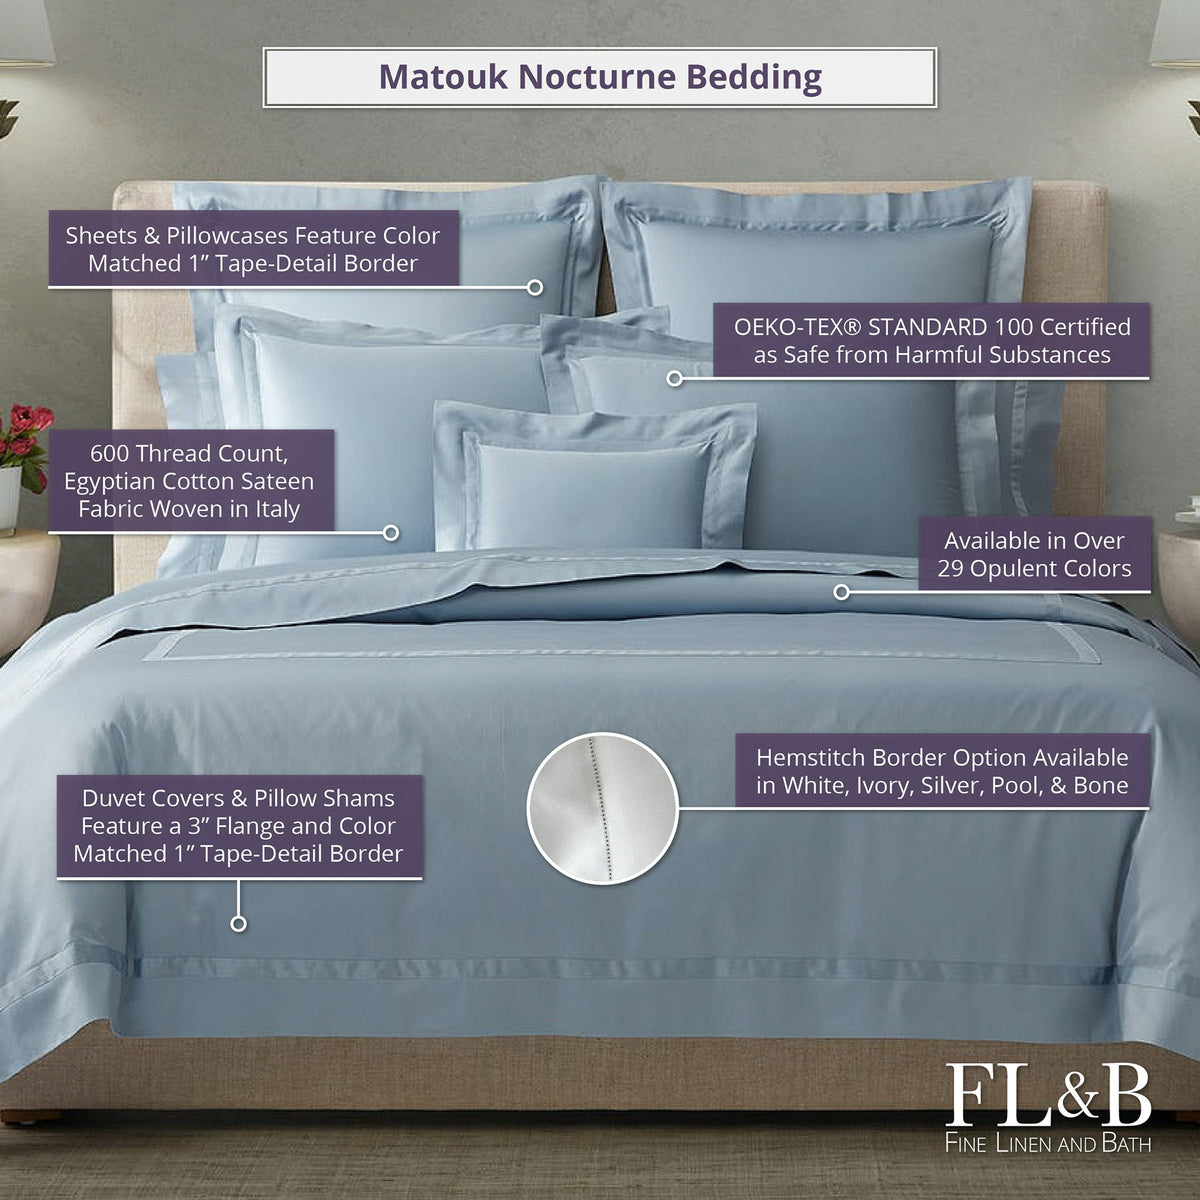 Matouk Nocturne Bedding on Bed in Bedroom with Descriptive Labels